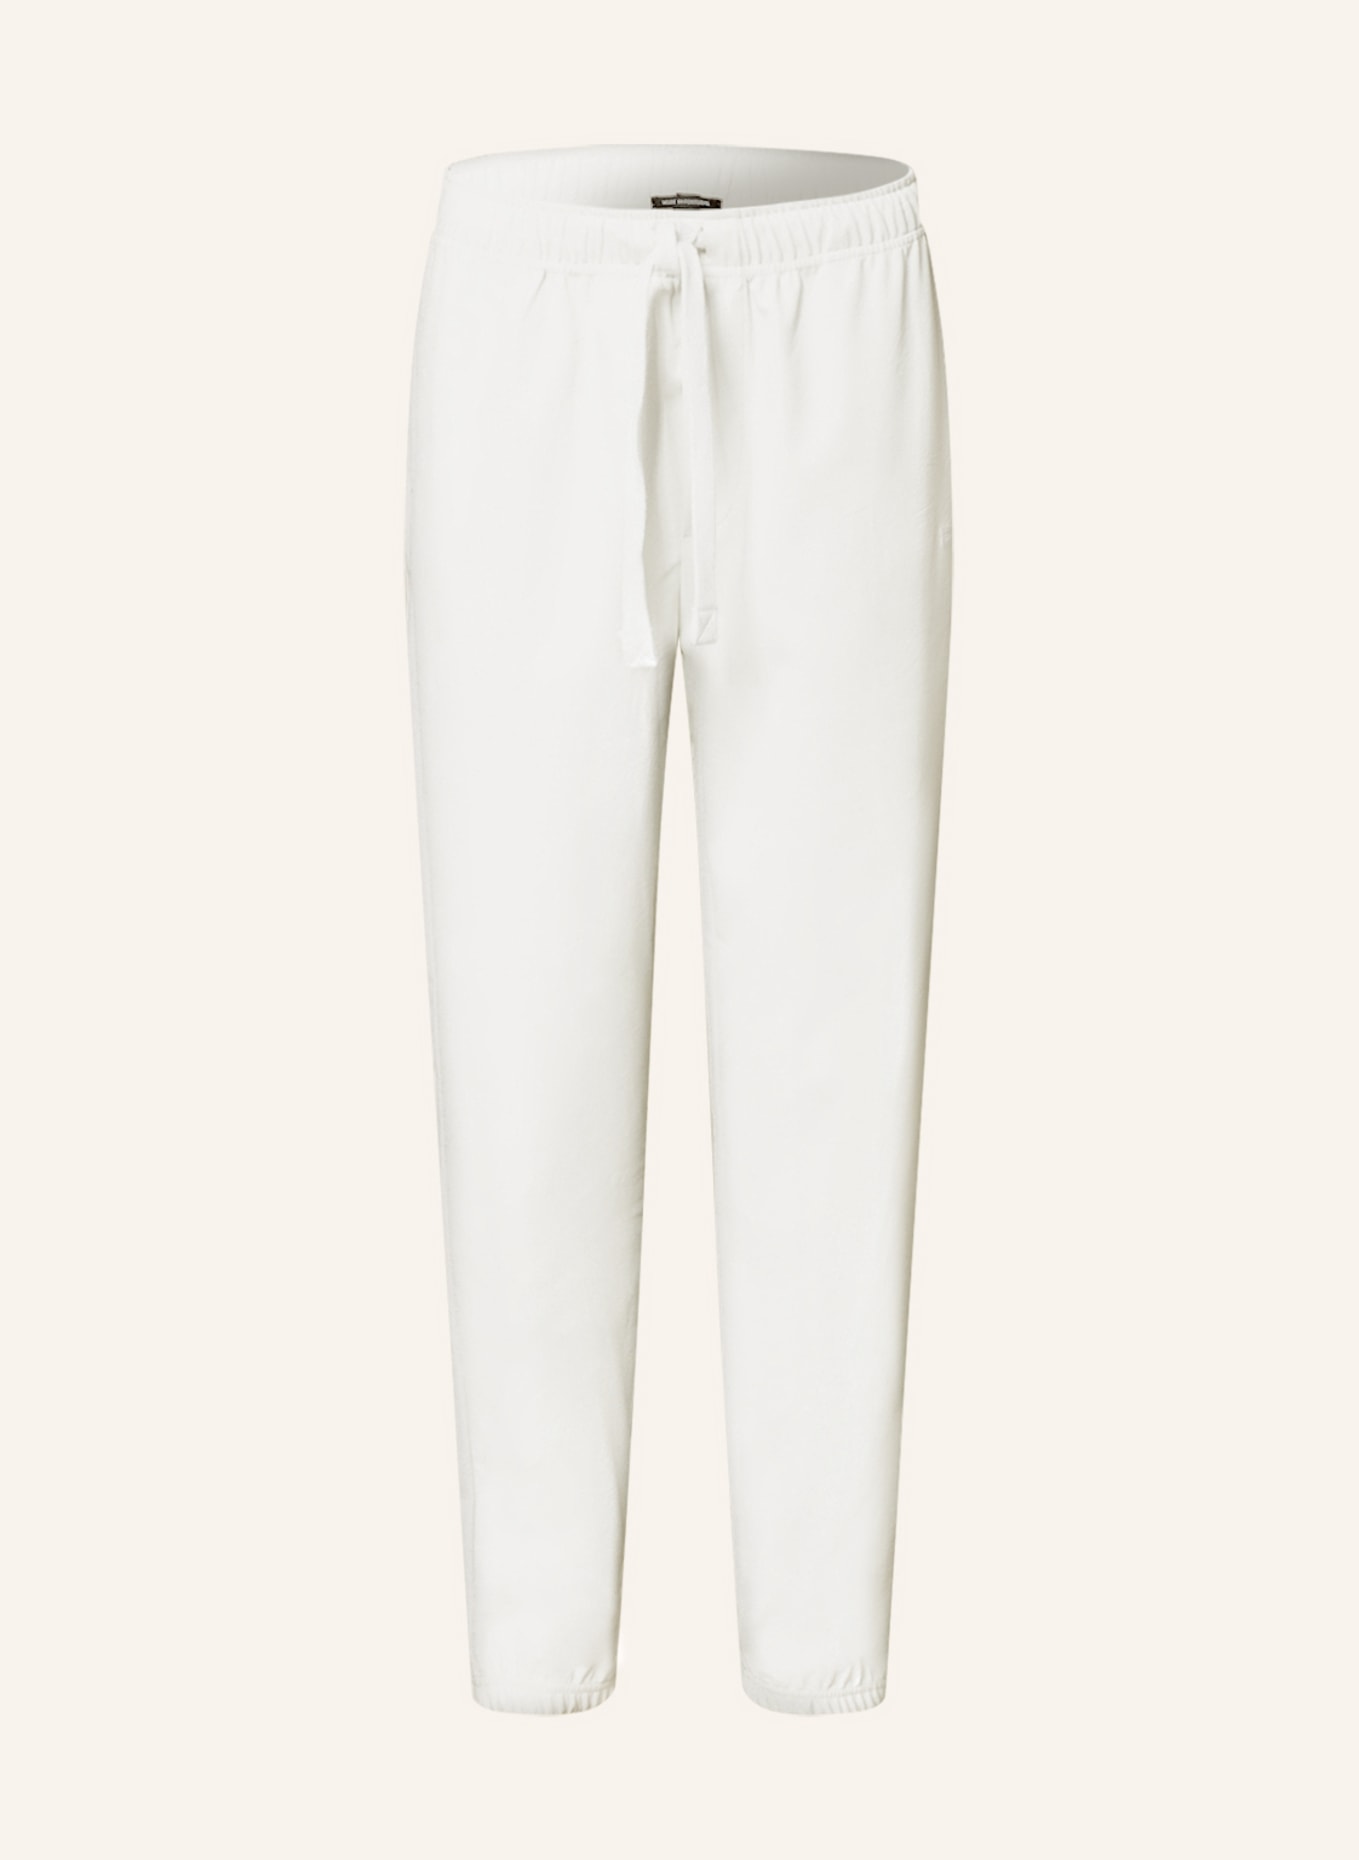 10DAYS Pants in leather look, Color: WHITE (Image 1)